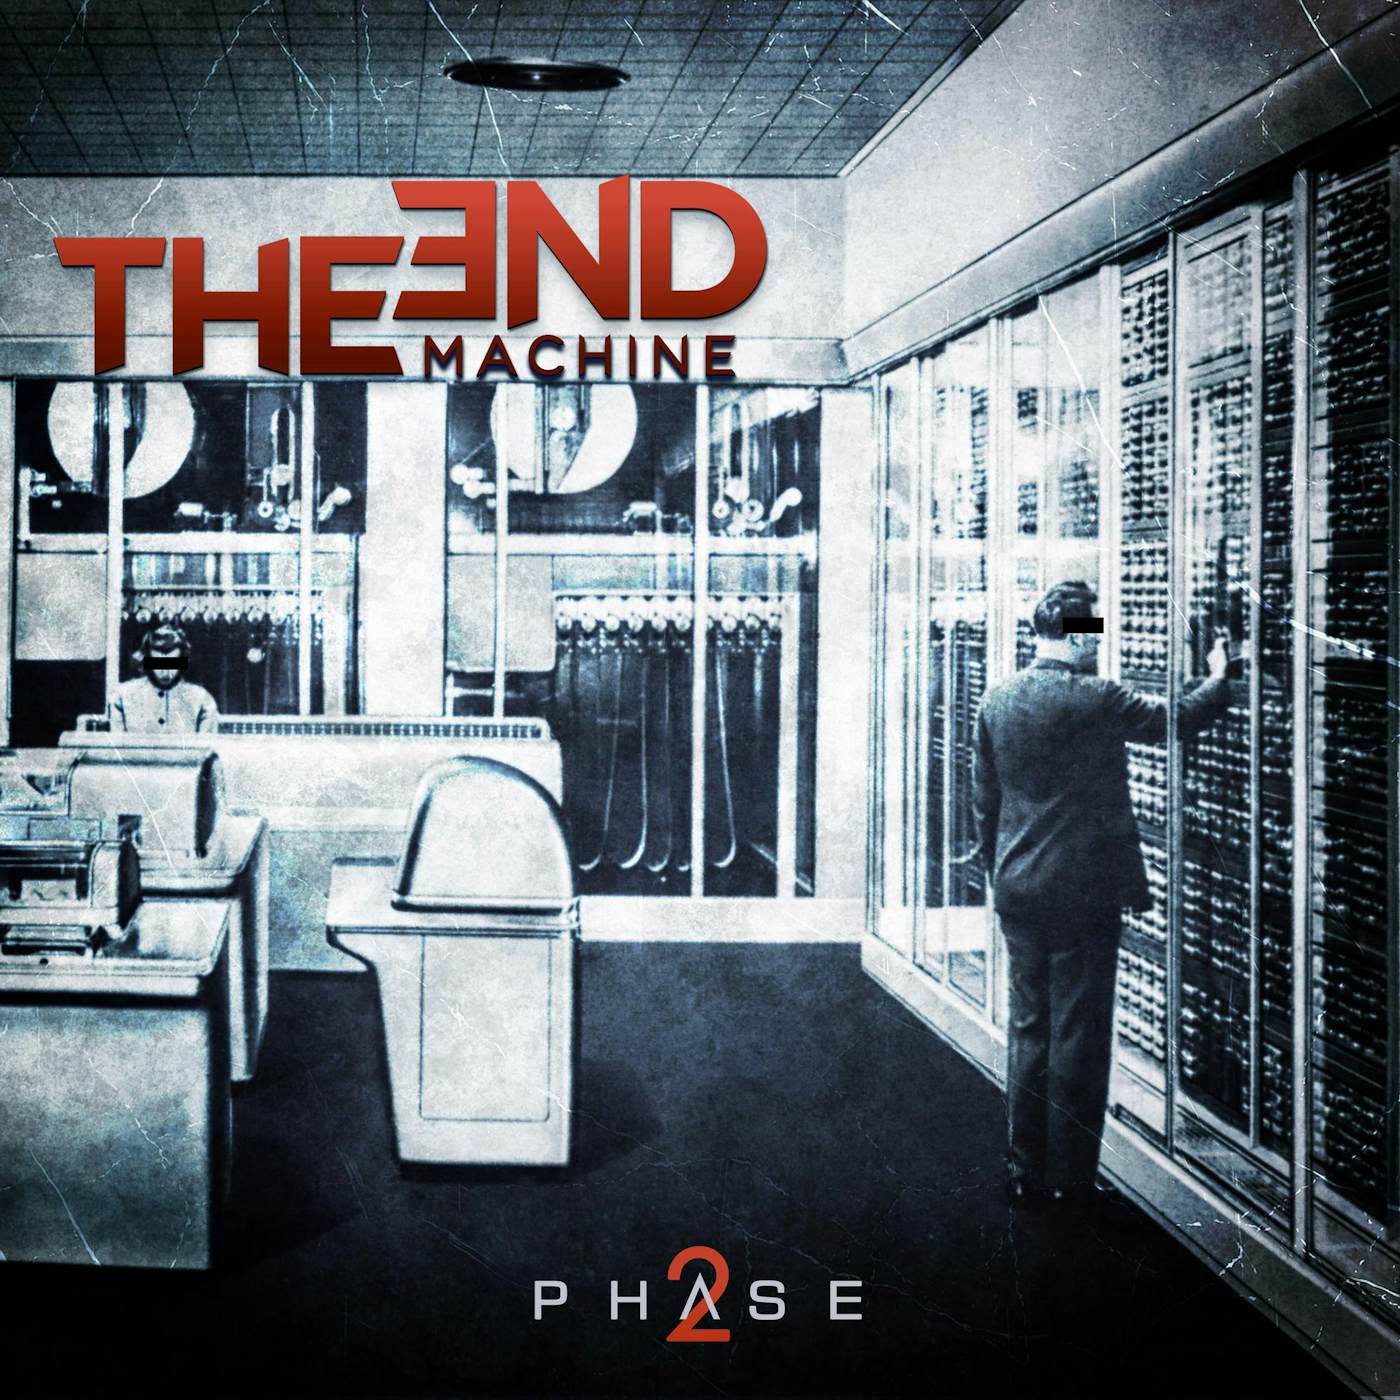 The End Machine Phase2 Vinyl Record